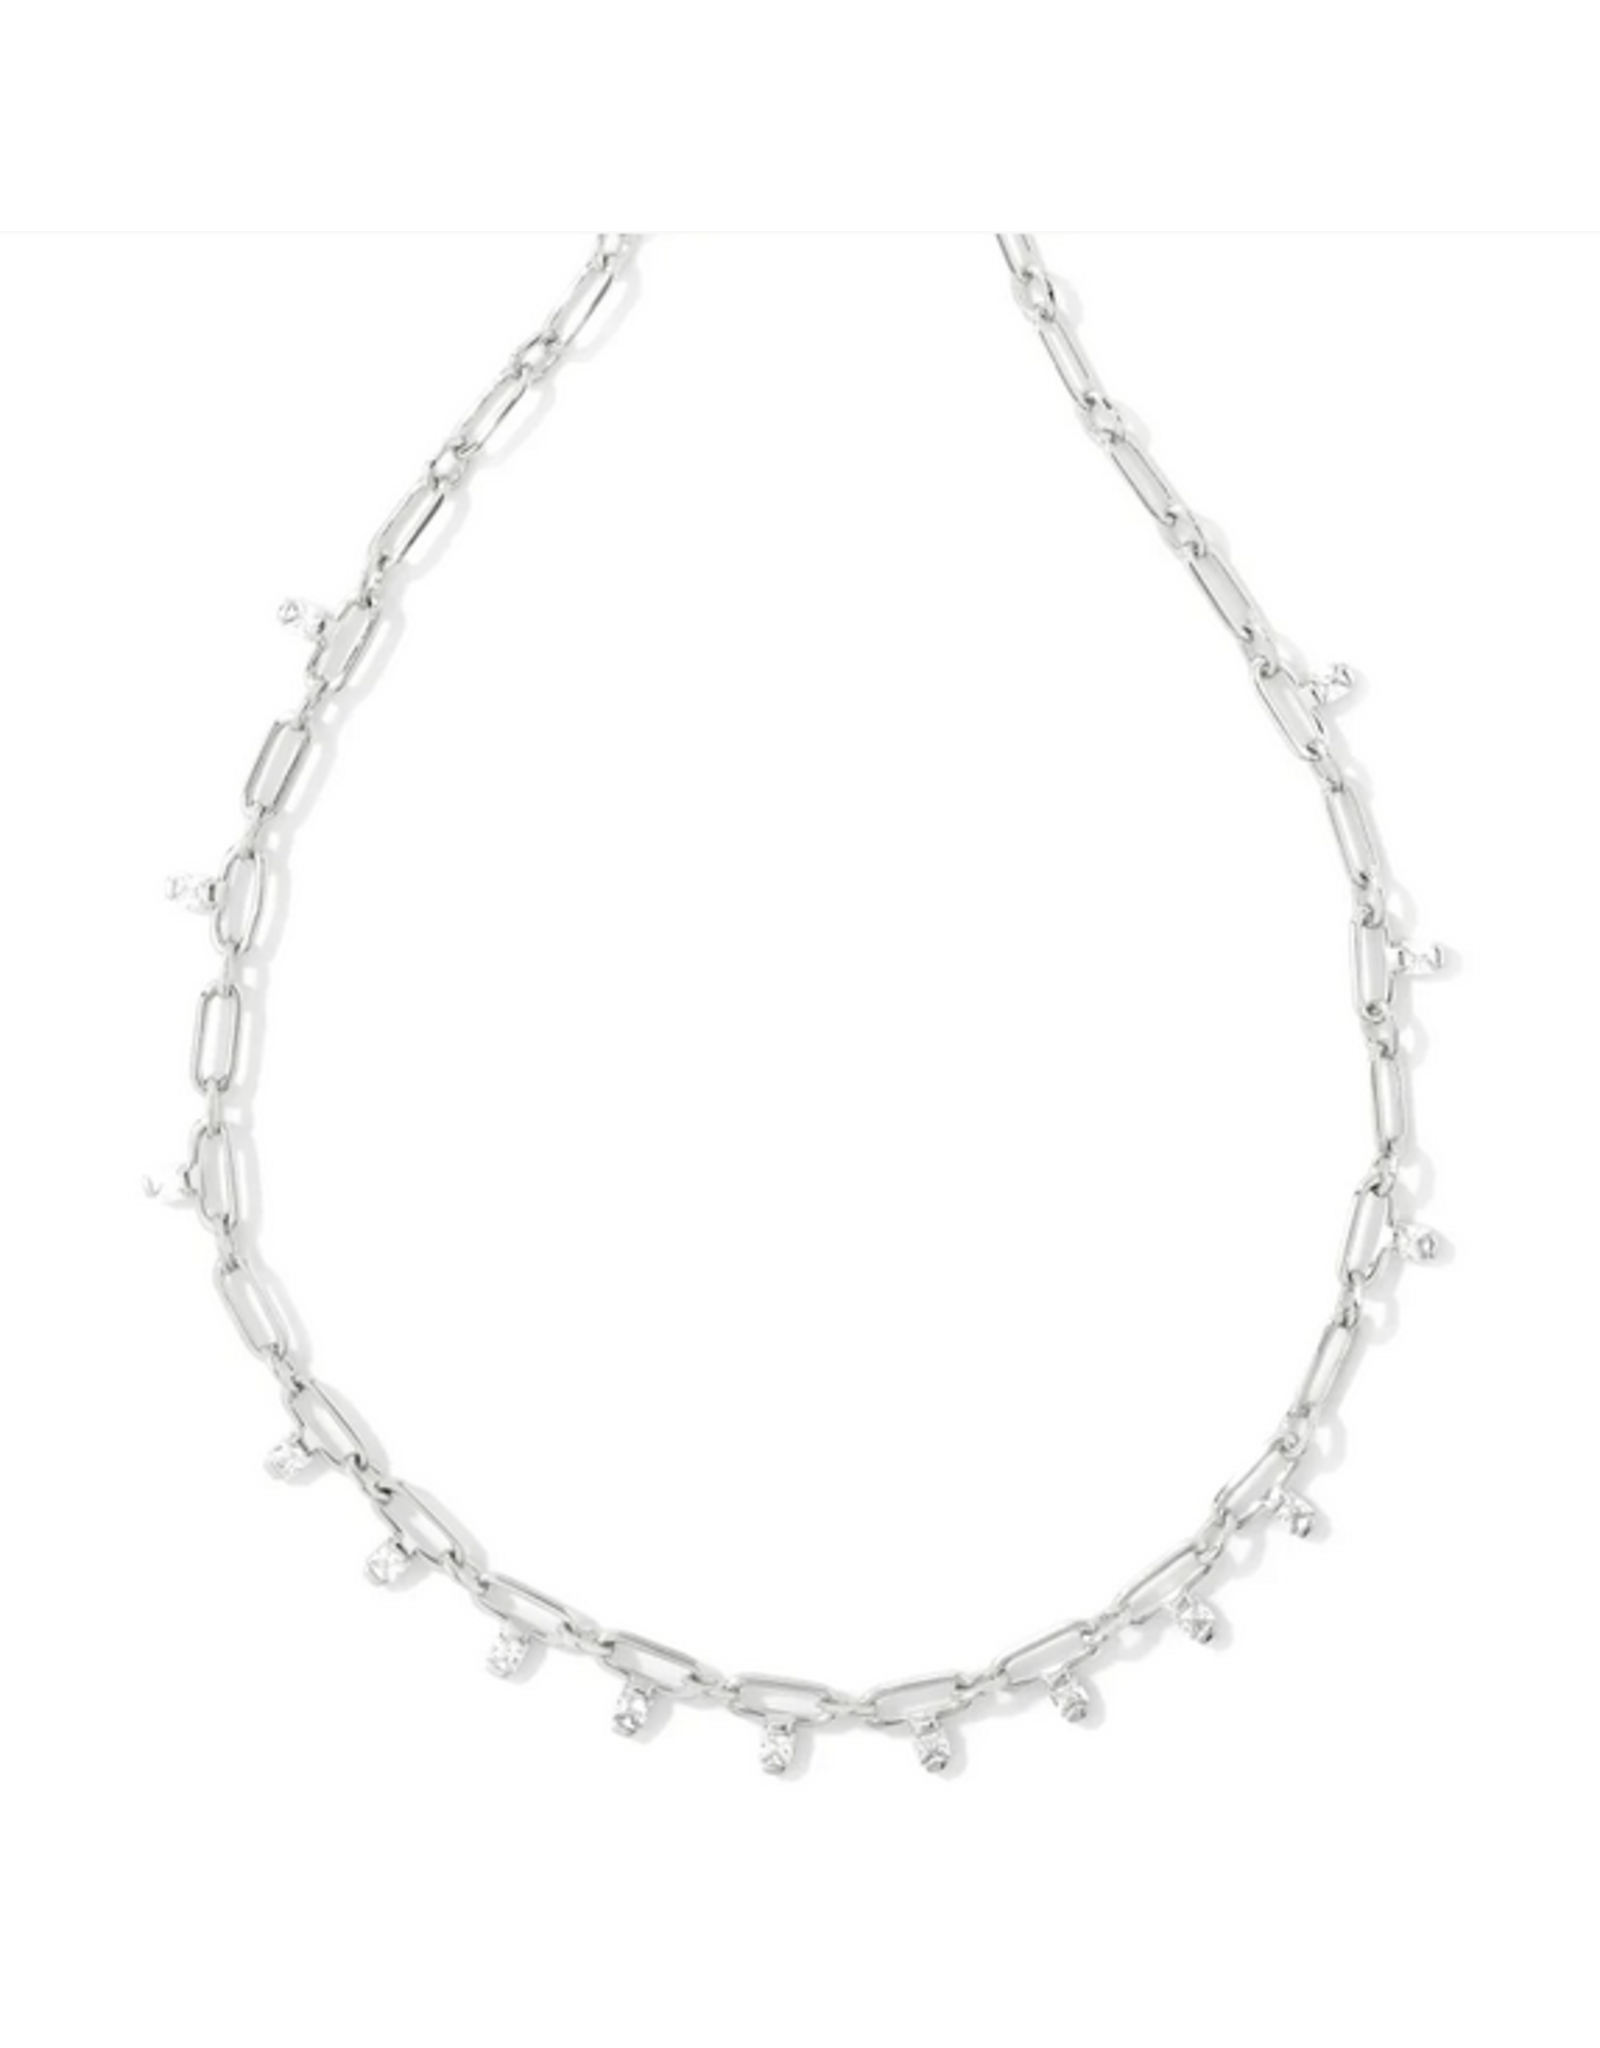 Kendra Scott Lindy Crystal Chain Necklace Rhod White Crystal